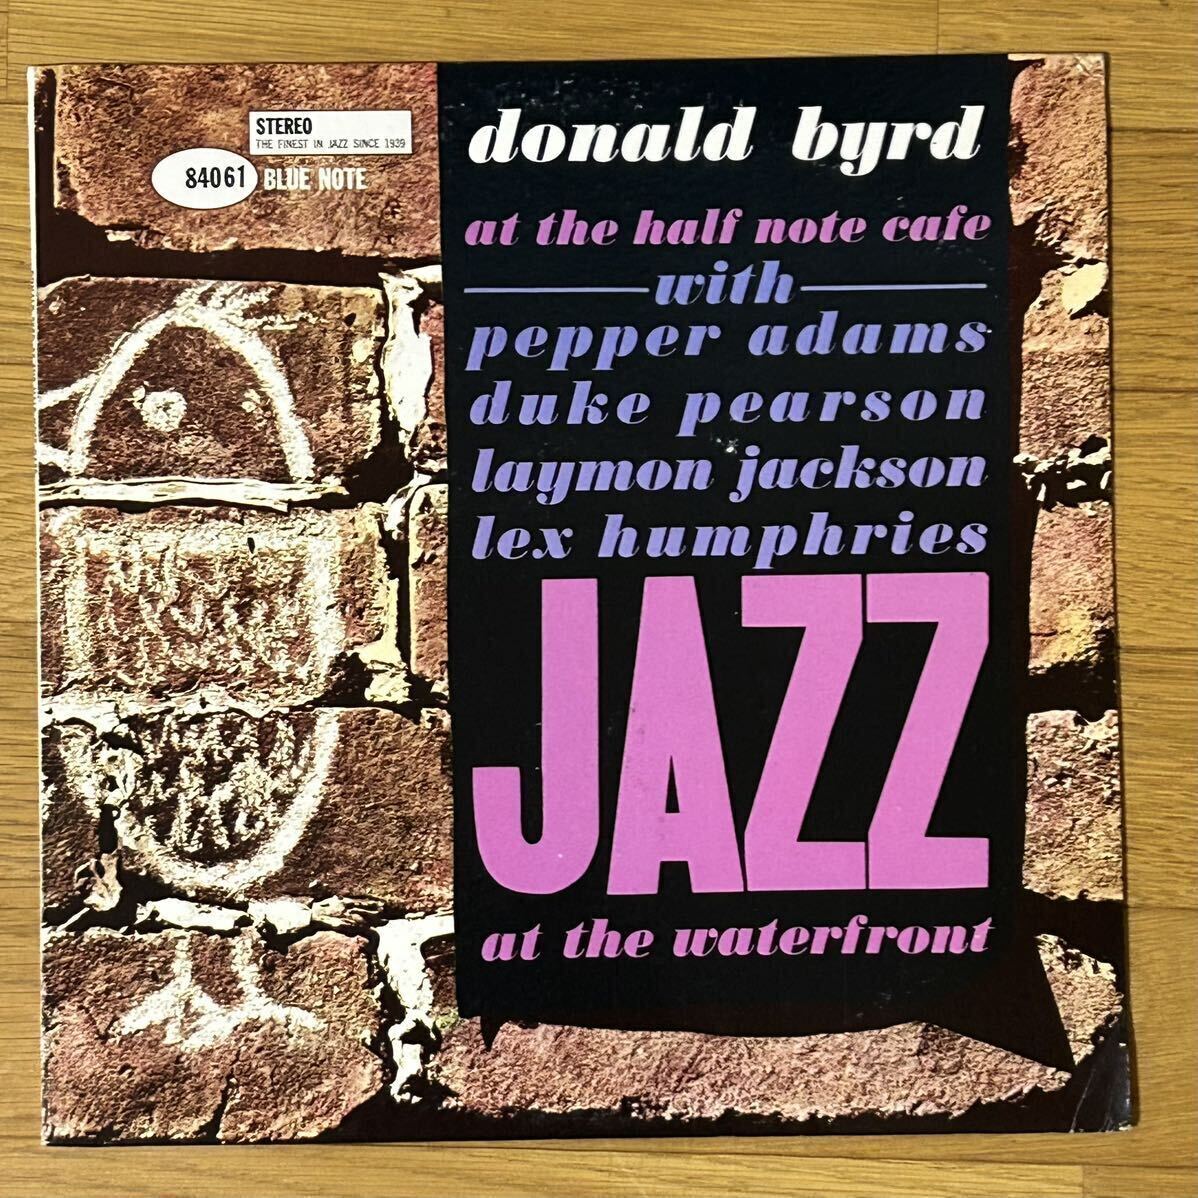 【RVG刻印あり】US盤 Stereo At The Half Note Cafe, Vol. 2 / Donald Byrd Blue Note BST 80461 超音波洗浄済 Duke Pearson参加_画像1